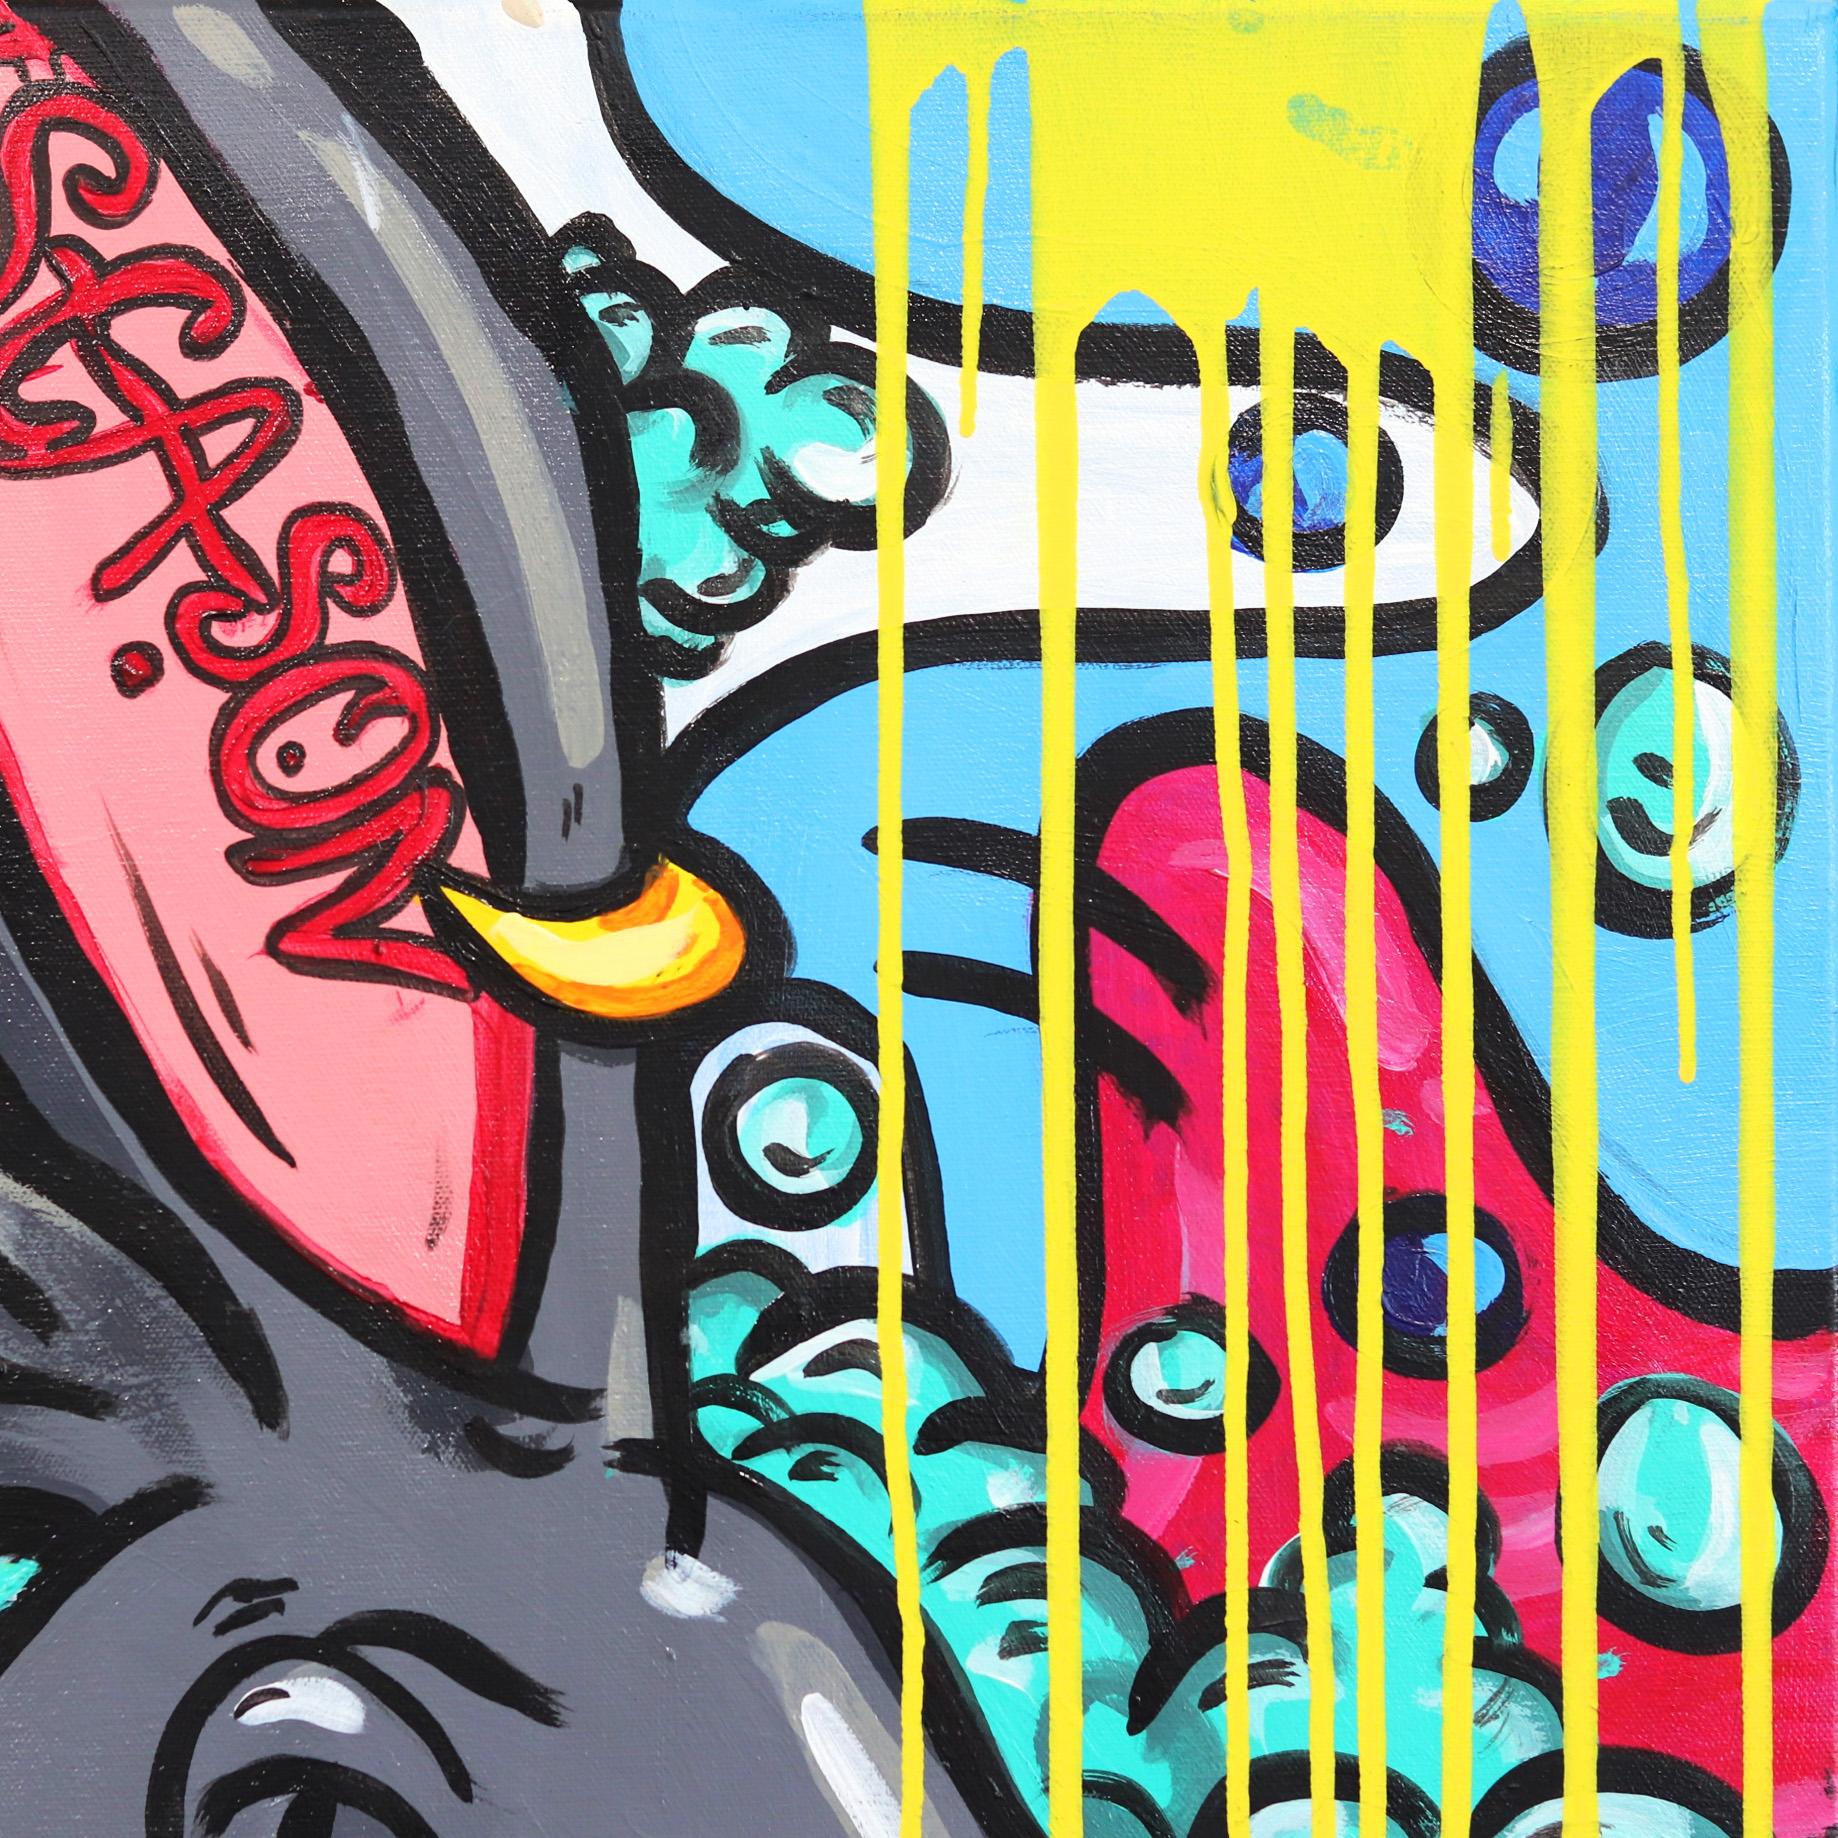 Los Angeles native RF fuses original and iconic characters in her vivid graffiti-inspired twisted pop artworks. Within each artwork, RF blends a mix of humor, eccentricity, and controlled chaos. The compositions she creates reimagine the familiar